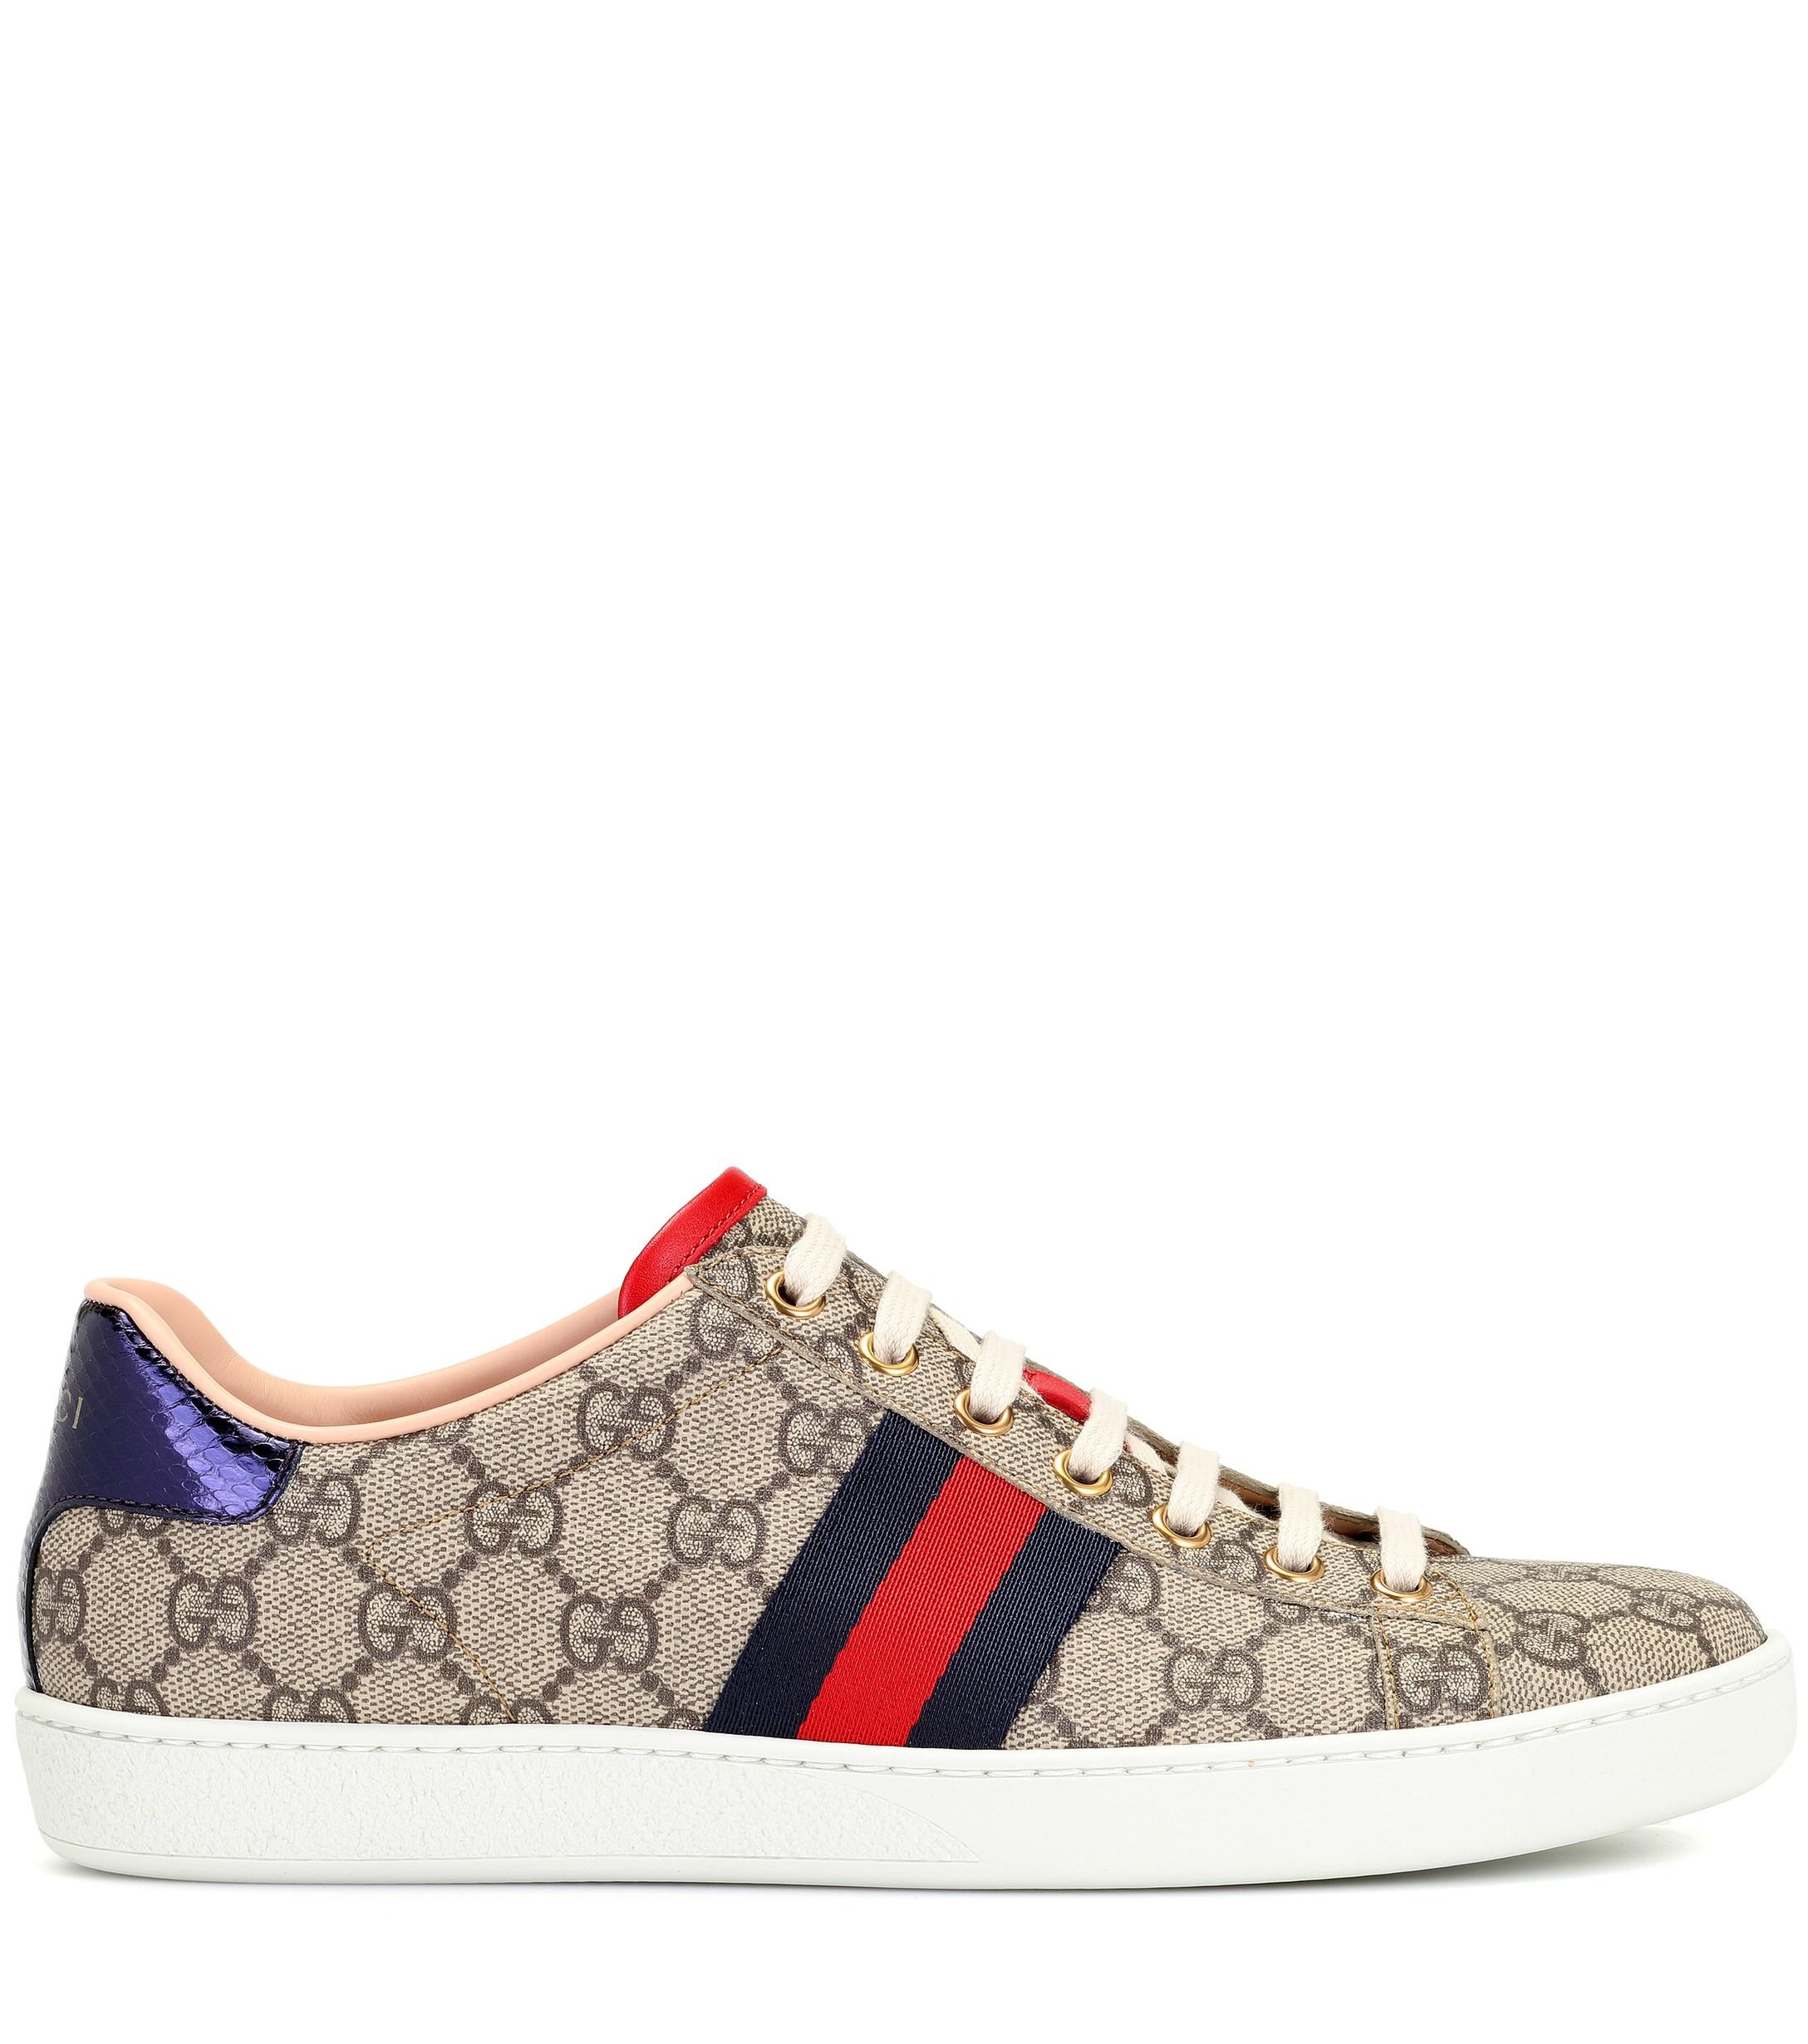 Gucci Canvas Ace GG Supreme Sneakers in Beige (Natural) - Lyst